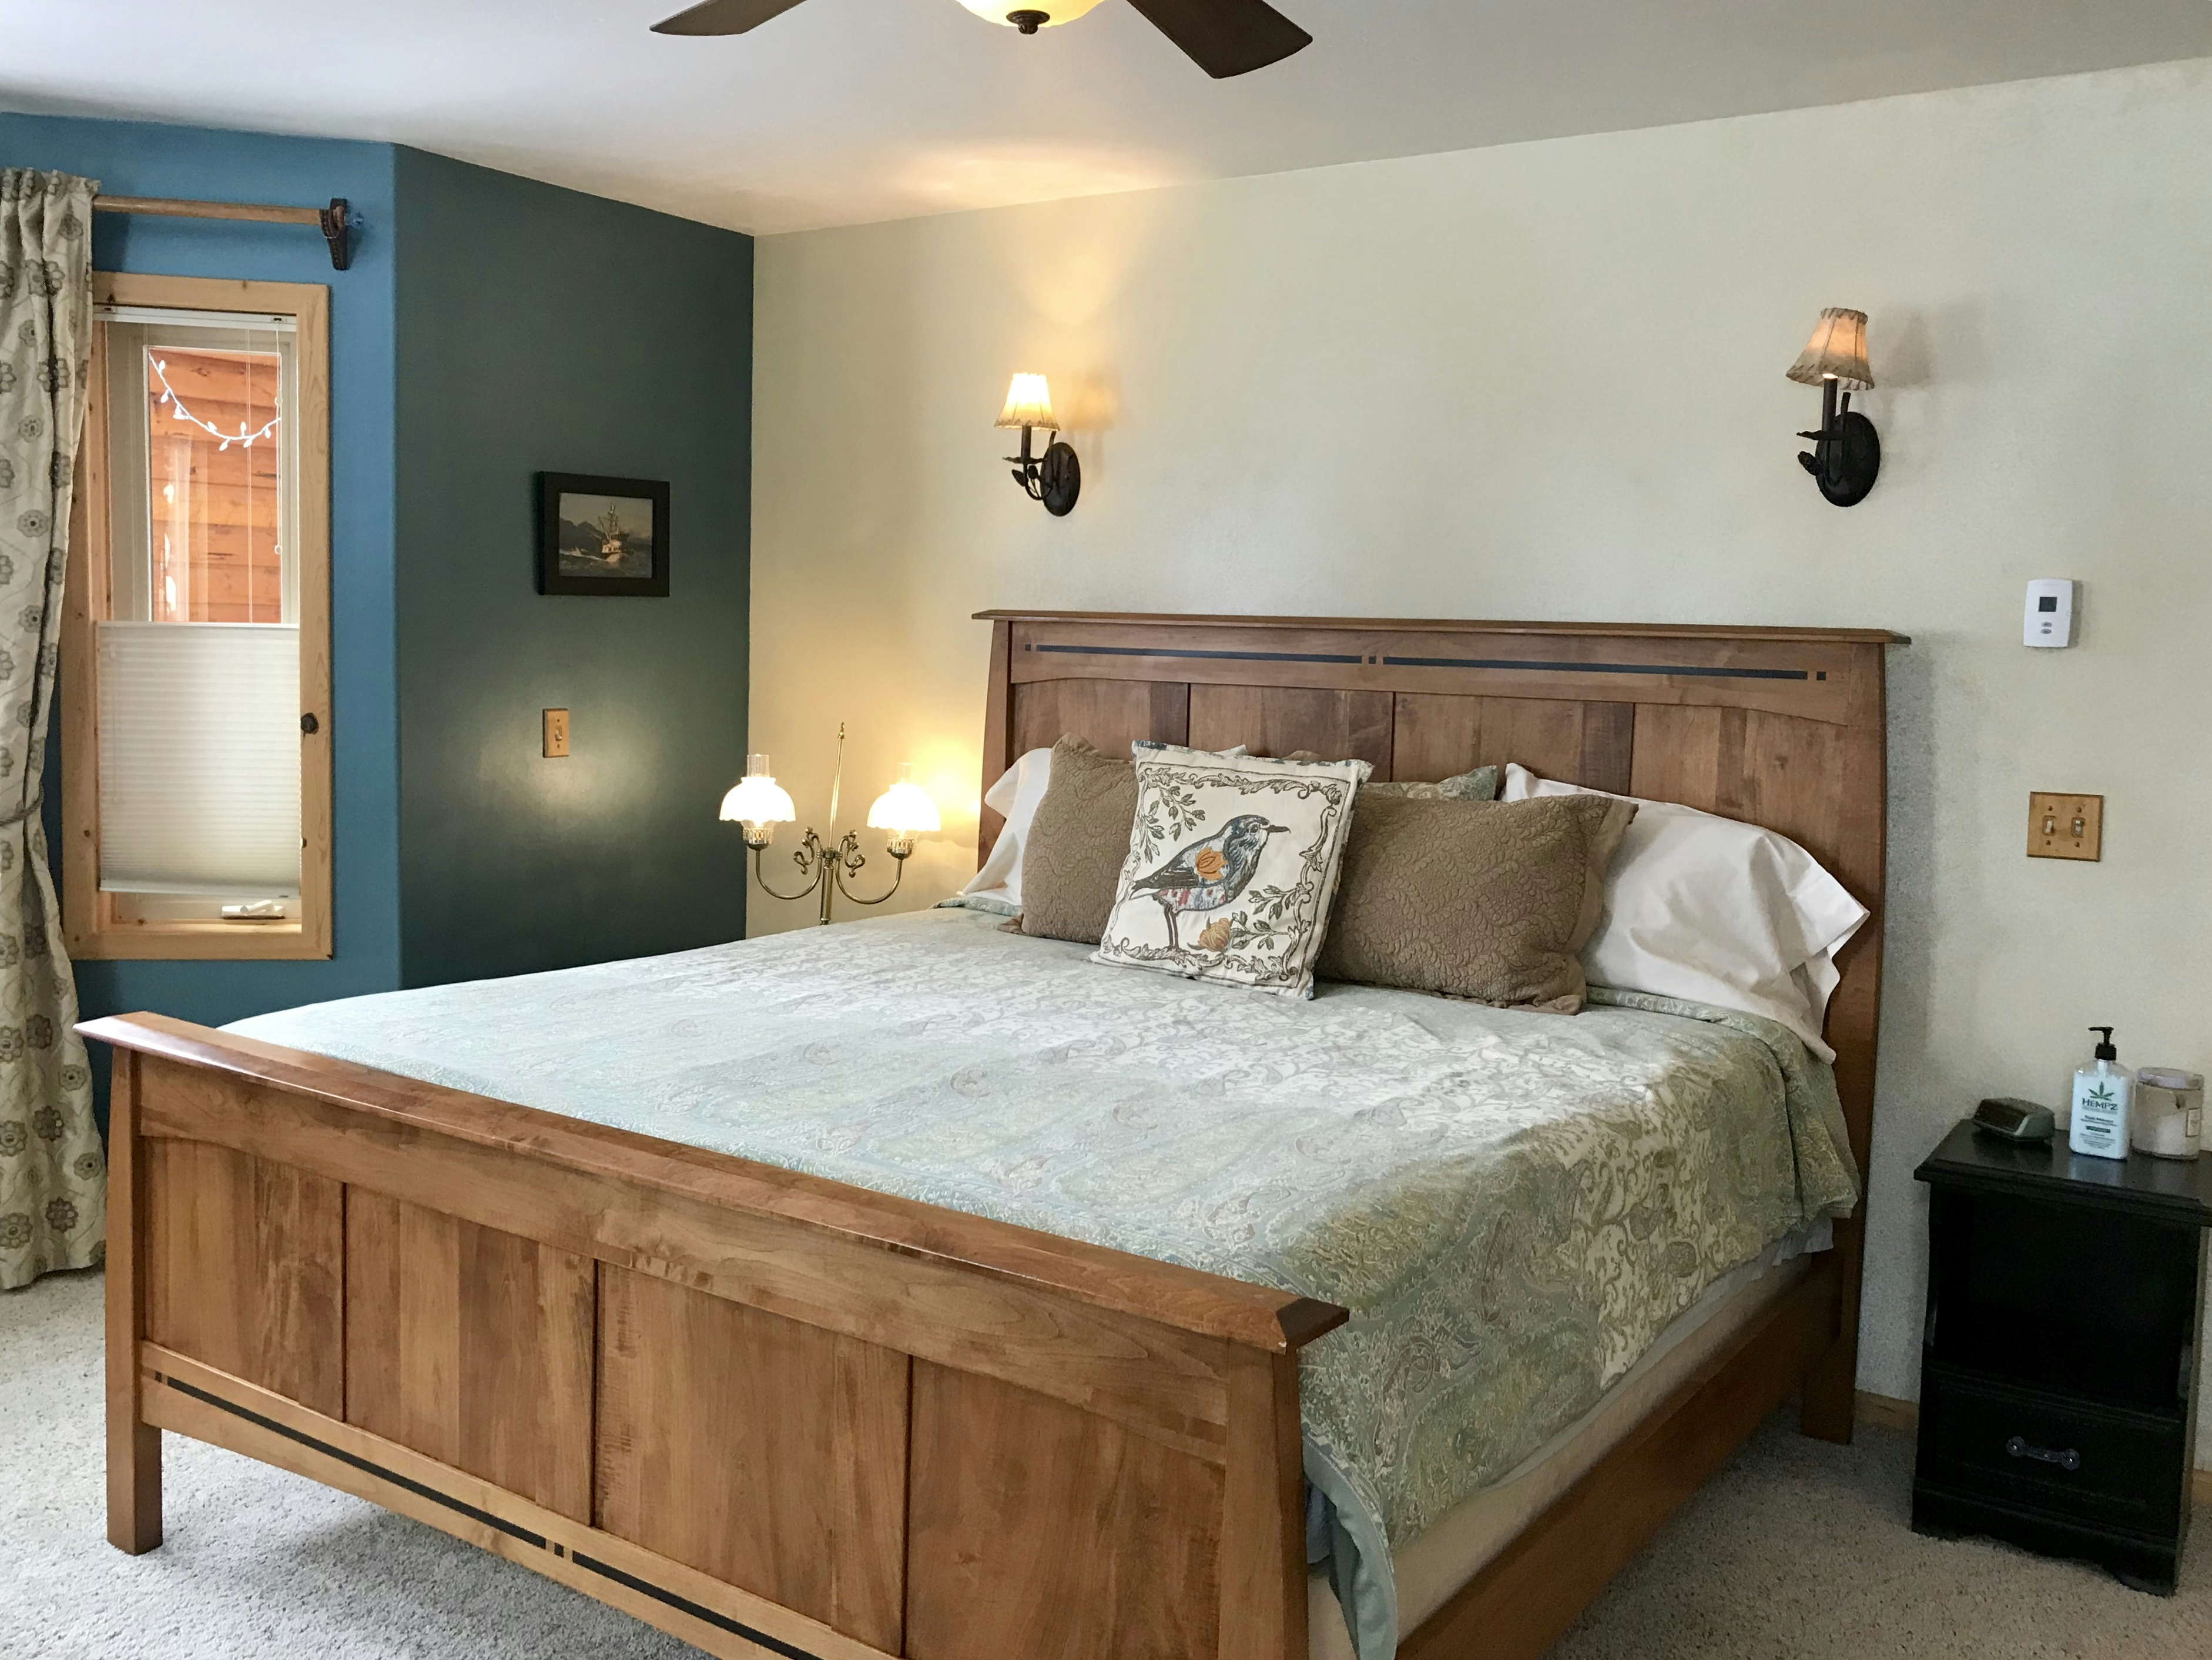 Cozy bed with wooden headboard and footboard, decorative throw pillows, nightstand, and ceiling fan